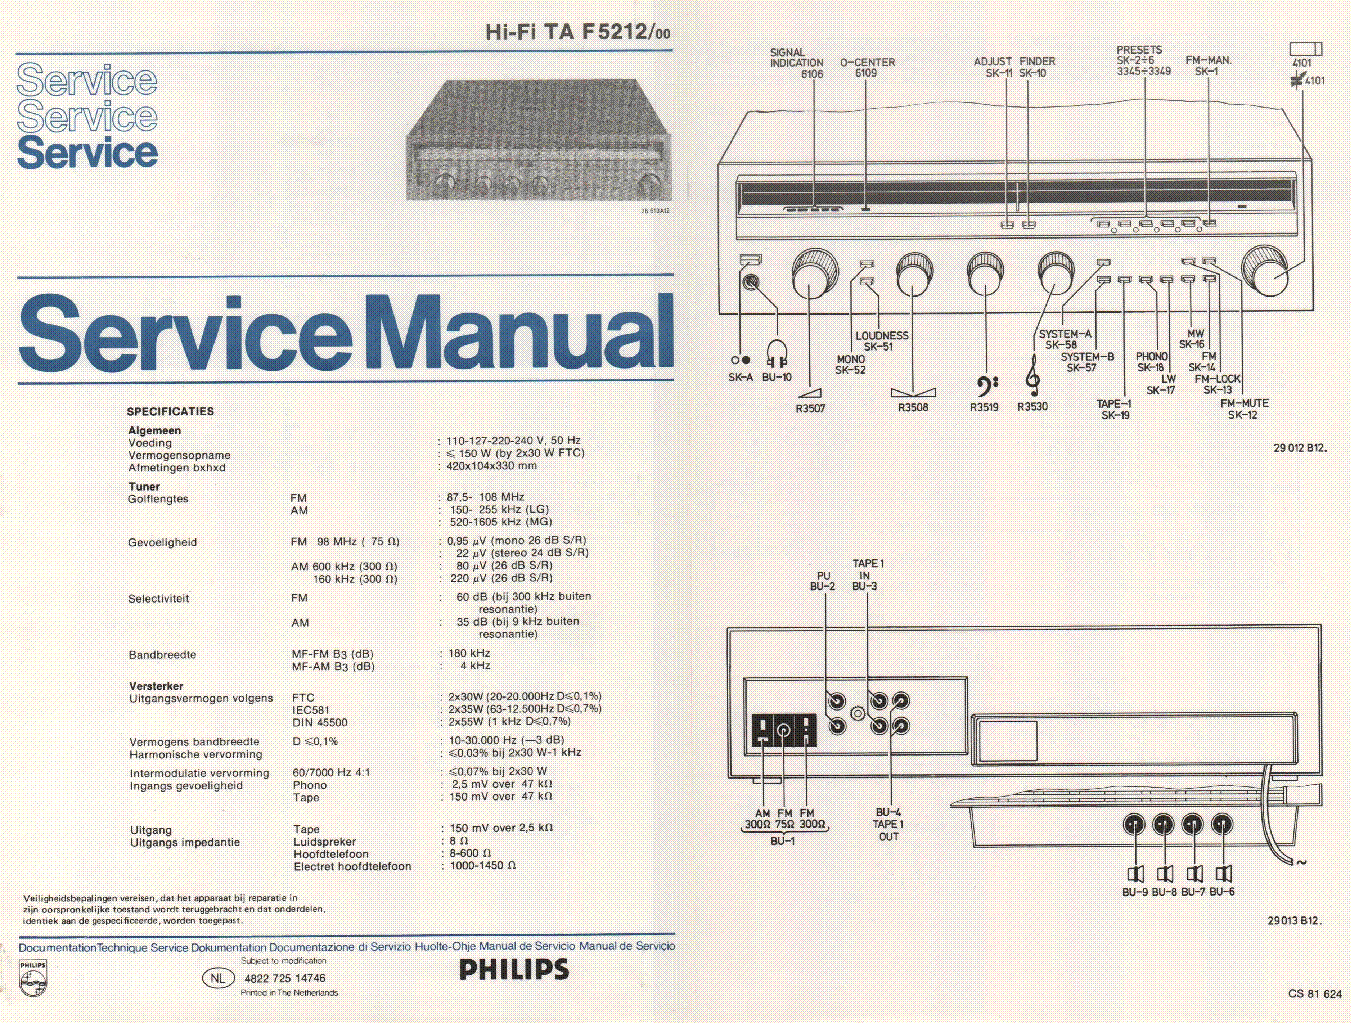 PHILIPS TA F5212 service manual (1st page)